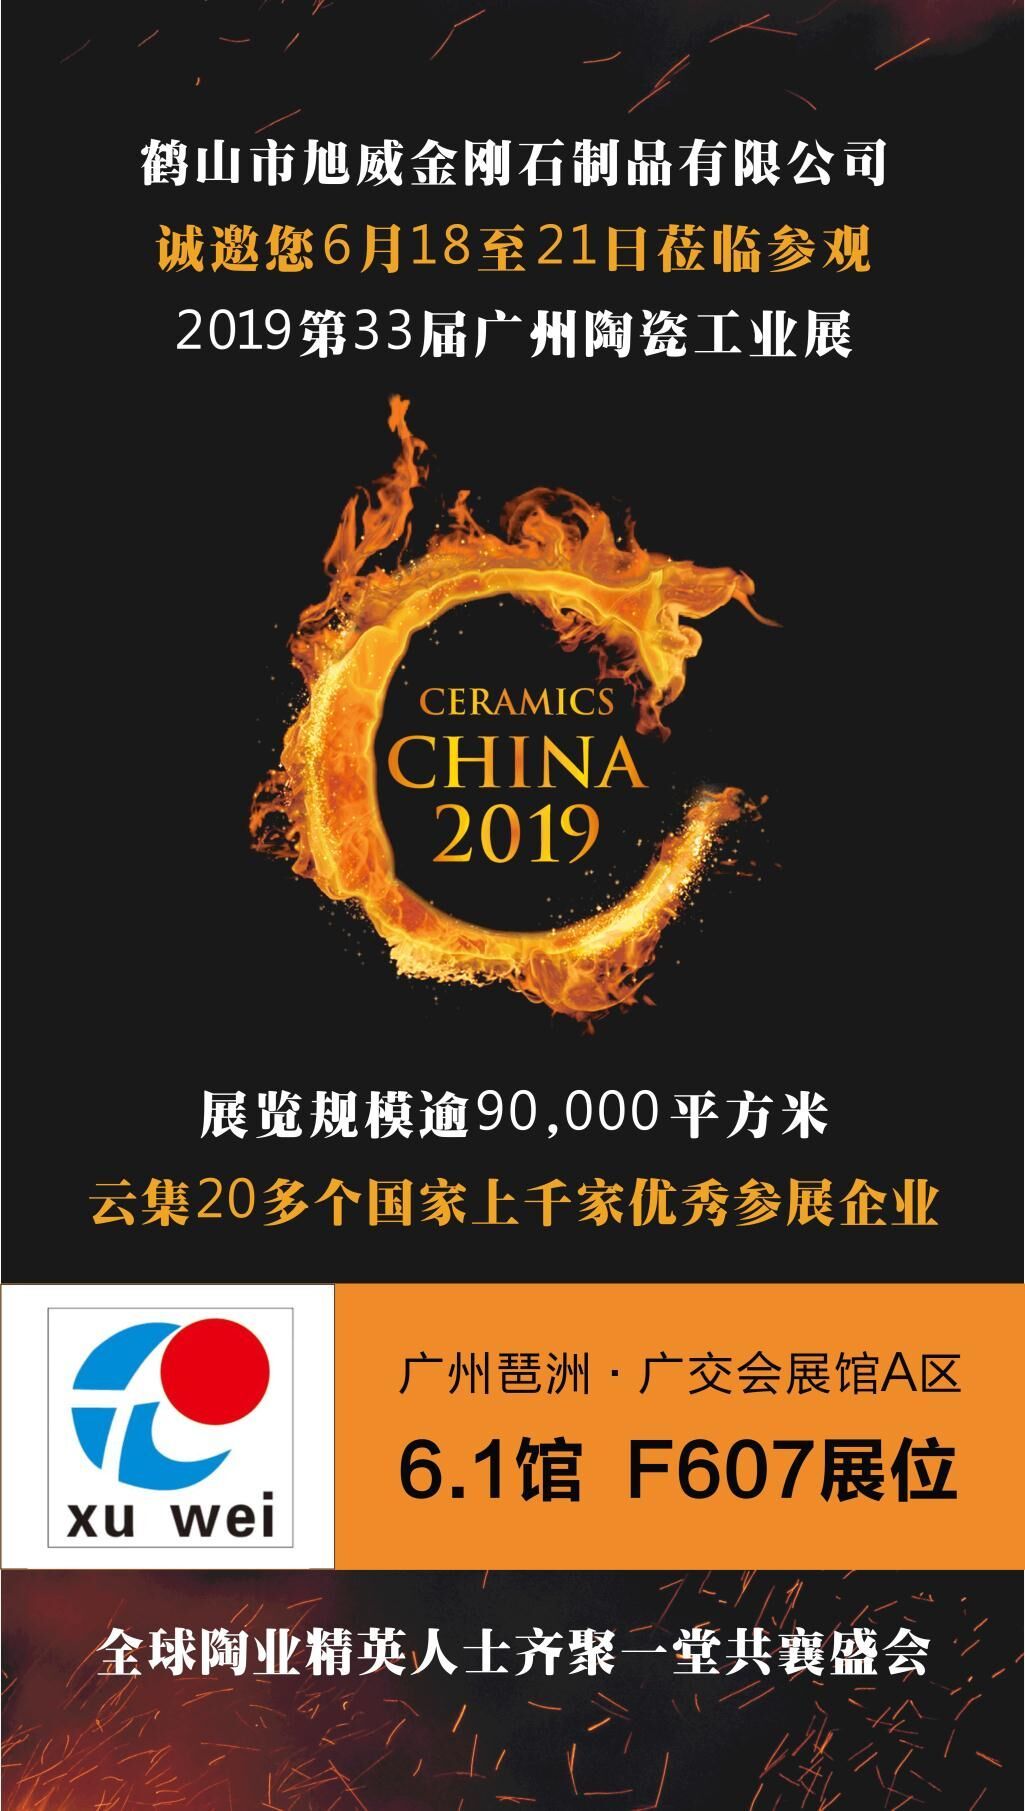 Heshan Xuwei Diamond Products Co., Ltd. sincerely invites you to visit the 33rd Guangzhou Ceramic Industry Exhibition in 2019